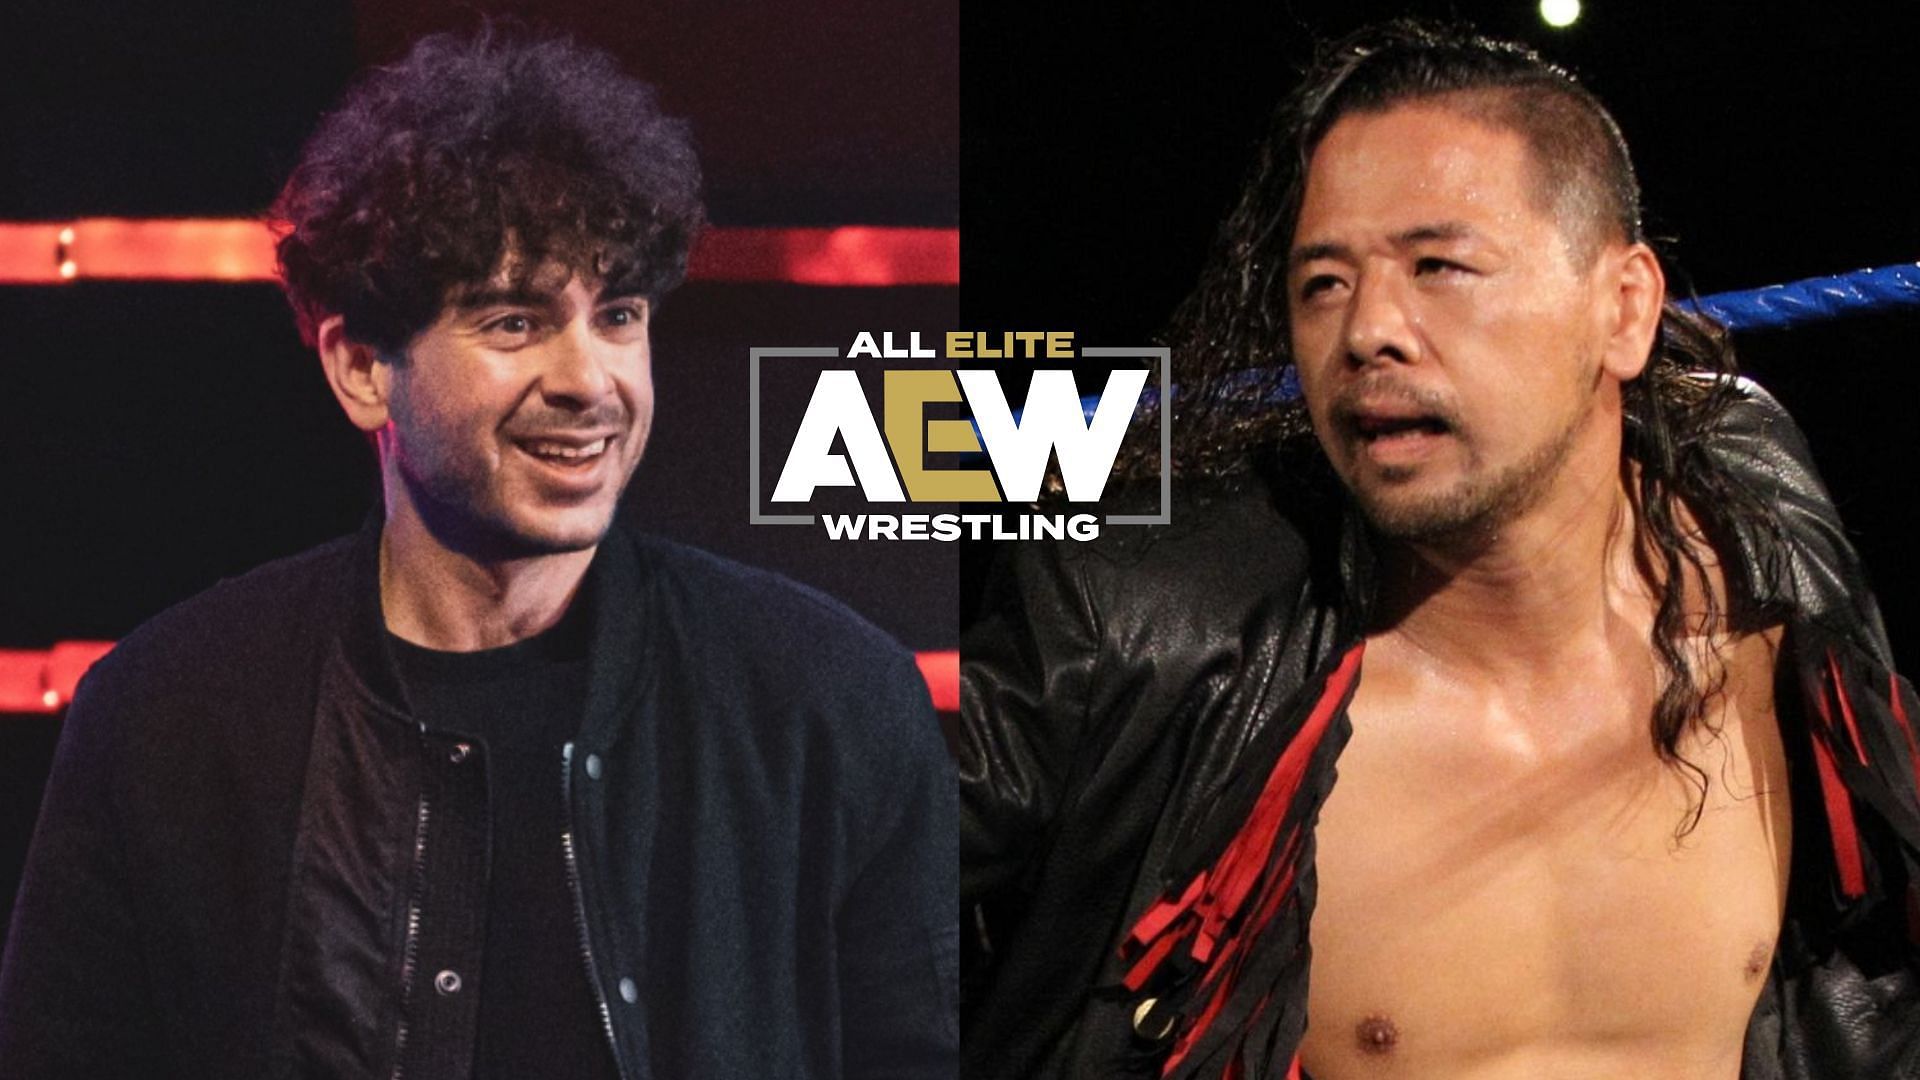 How did Tony Khan feel about Shinsuke Nakamura working with one of AEW